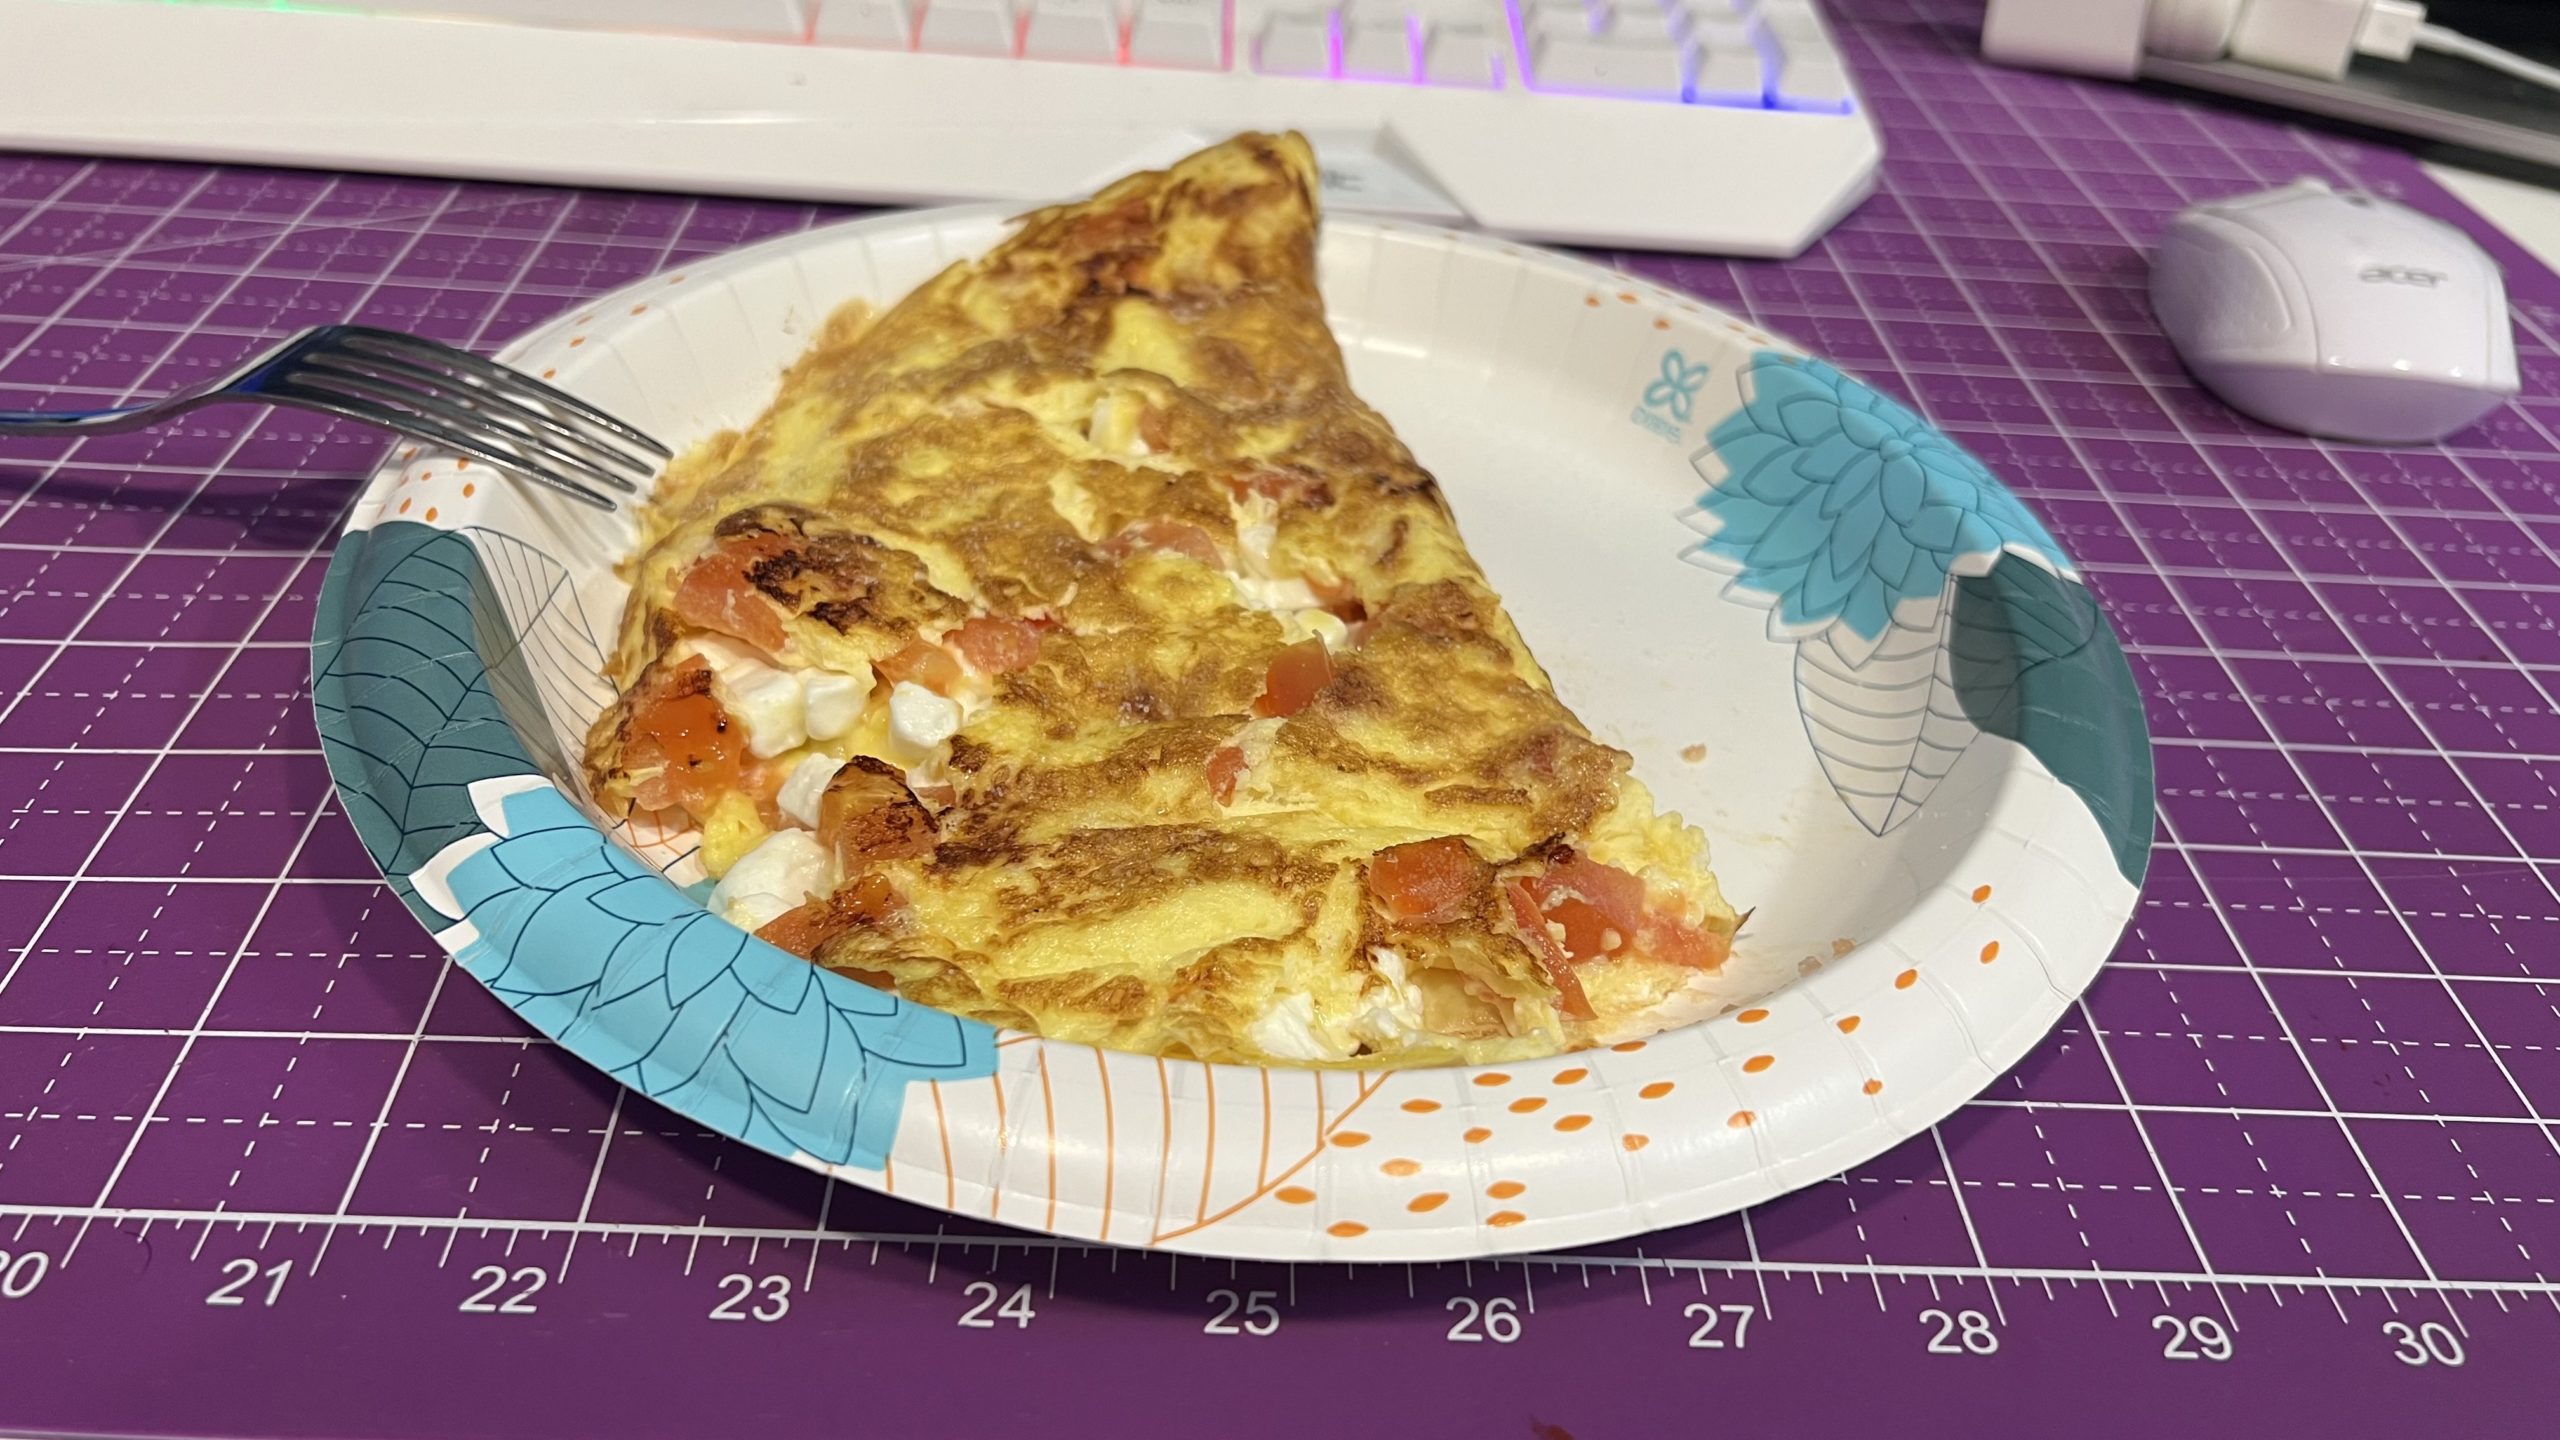 The Quest to Make the Perfect Omelet